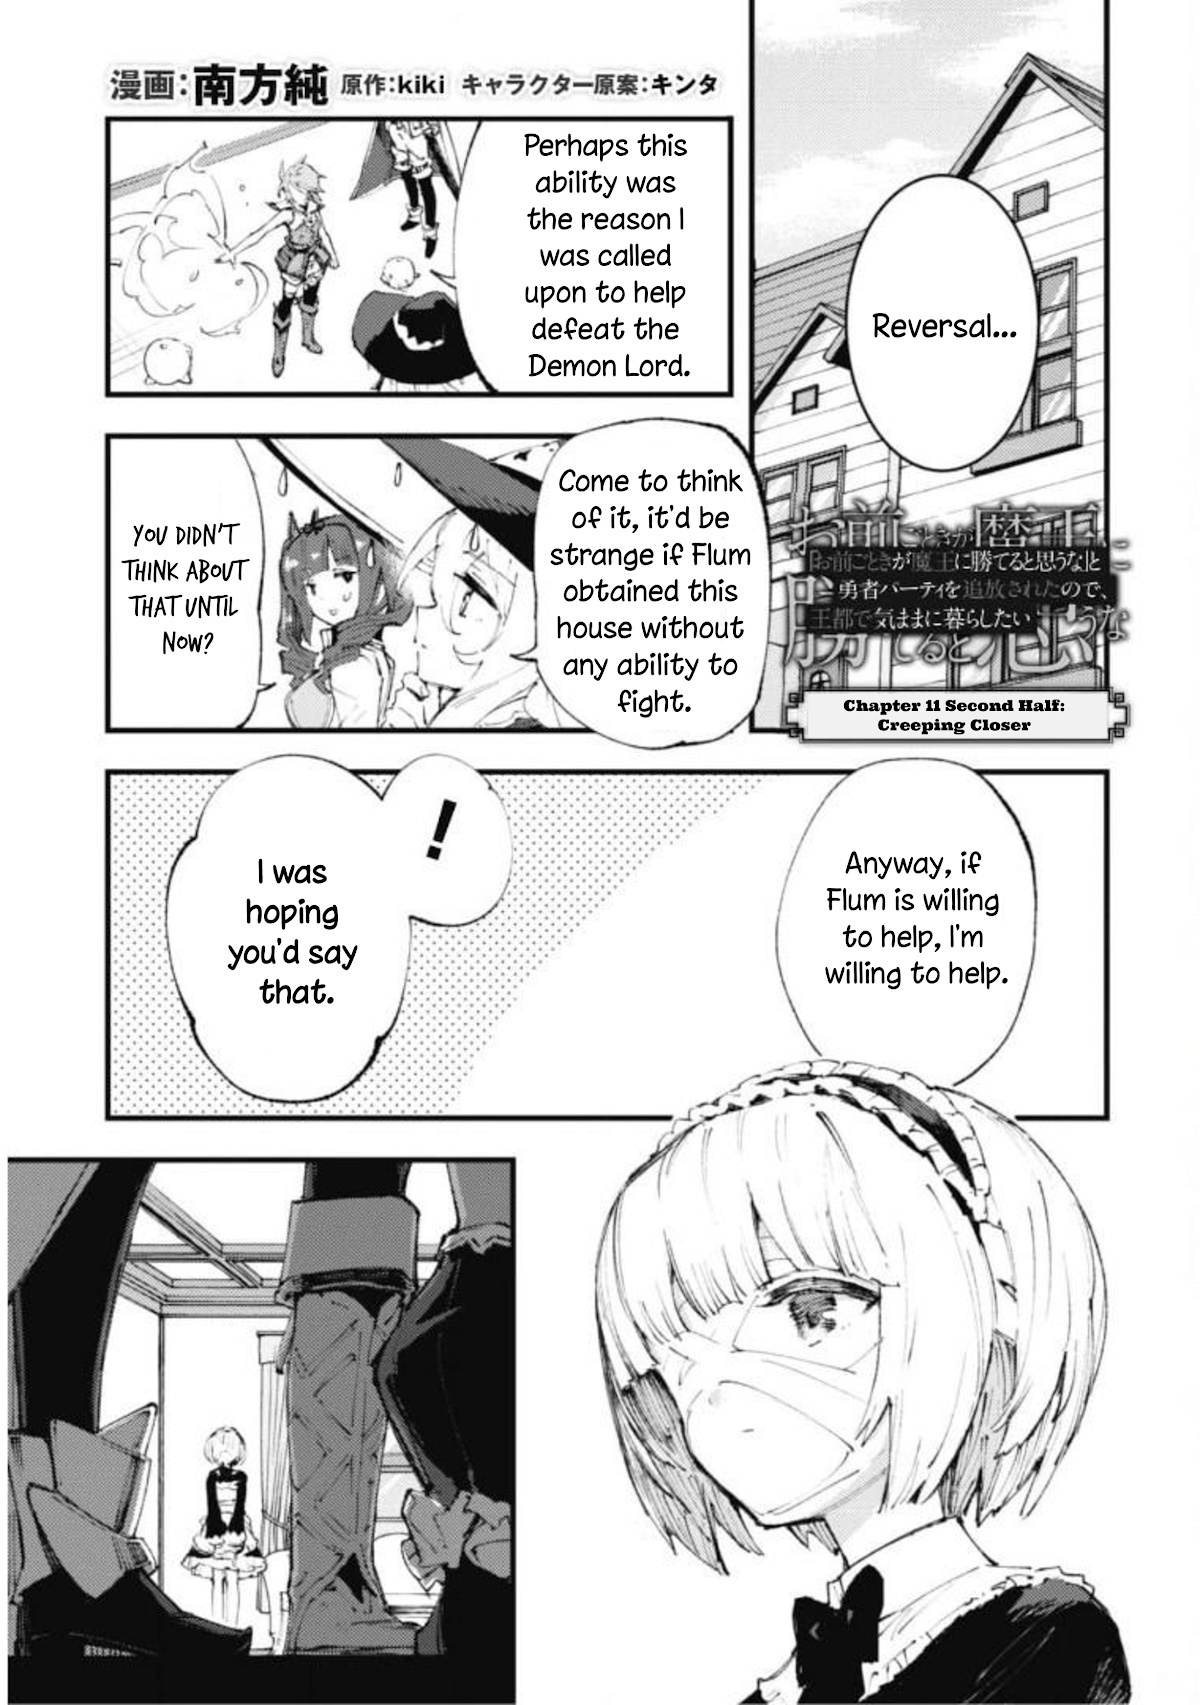 Do You Think Someone Like You Could Defeat The Demon Lord? - Page 1